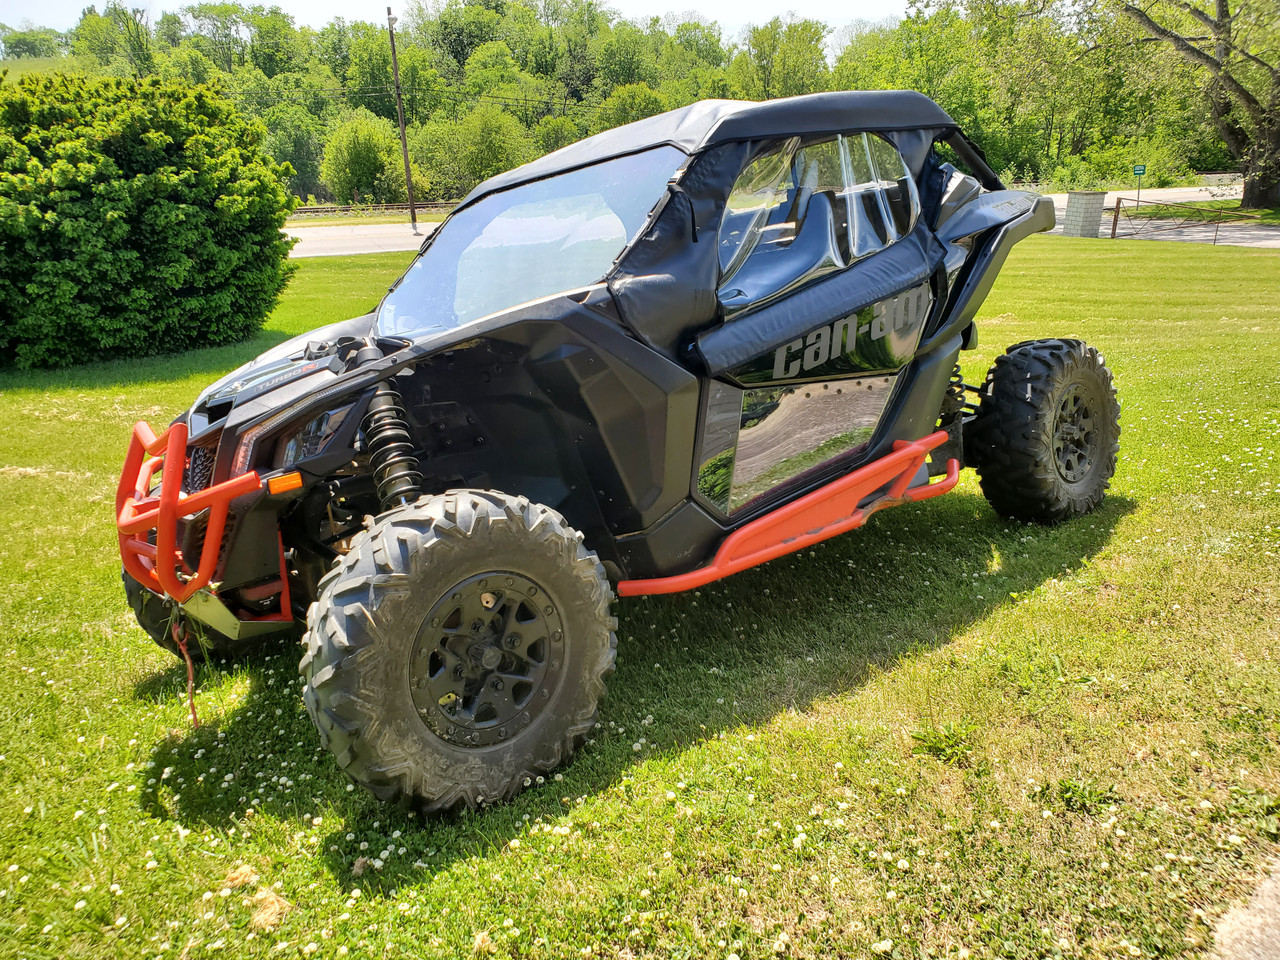 3 Star side x side can-am maverick X3 full cab enclosure side angle view